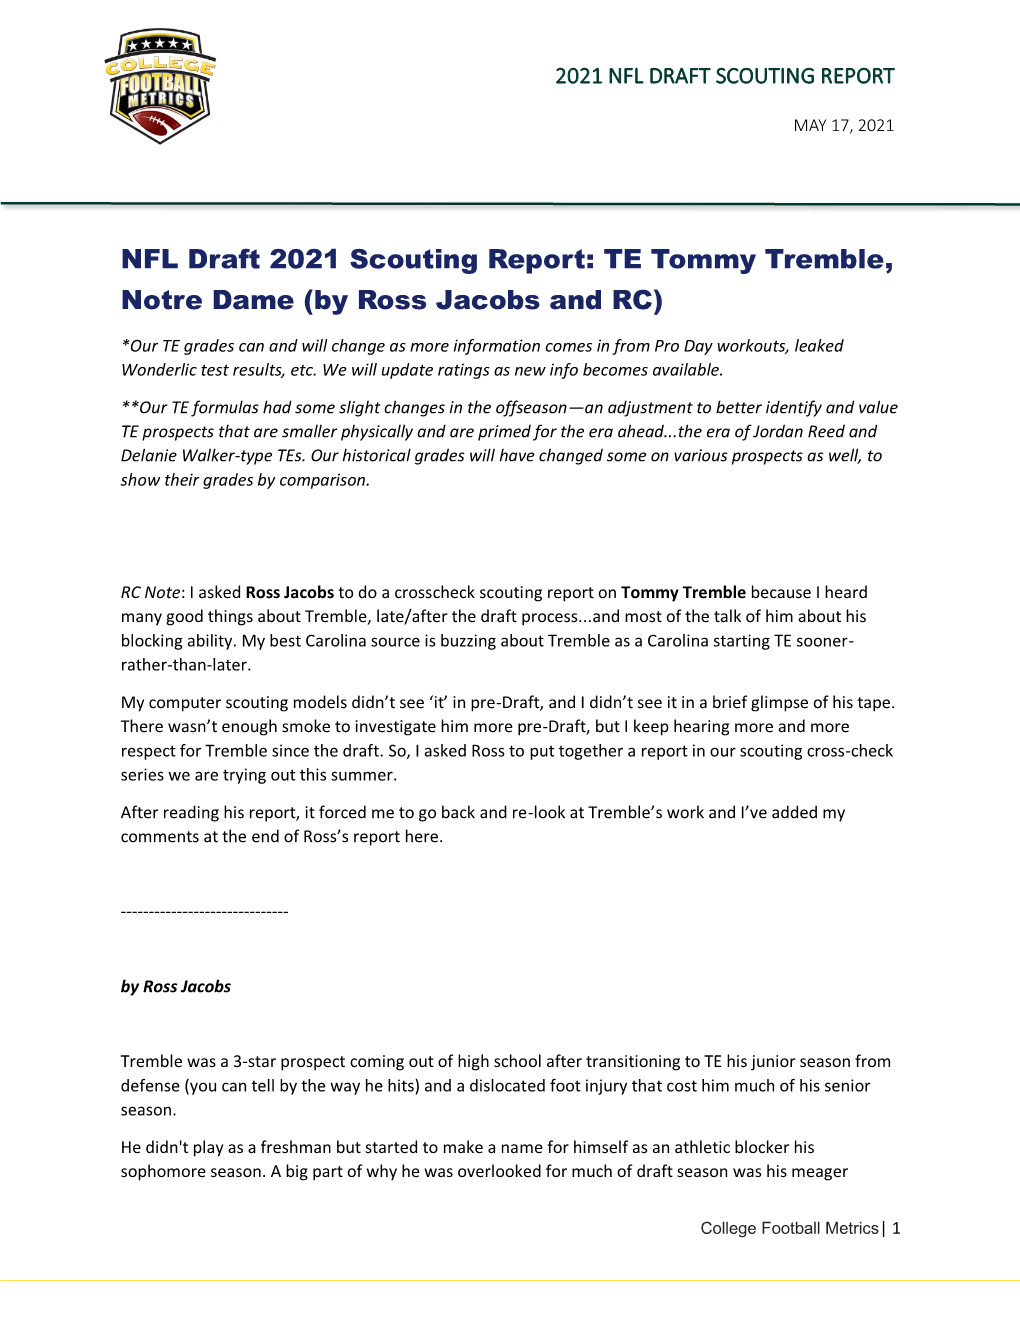 NFL Draft 2021 Scouting Report: TE Tommy Tremble, Notre Dame (By Ross Jacobs and RC)